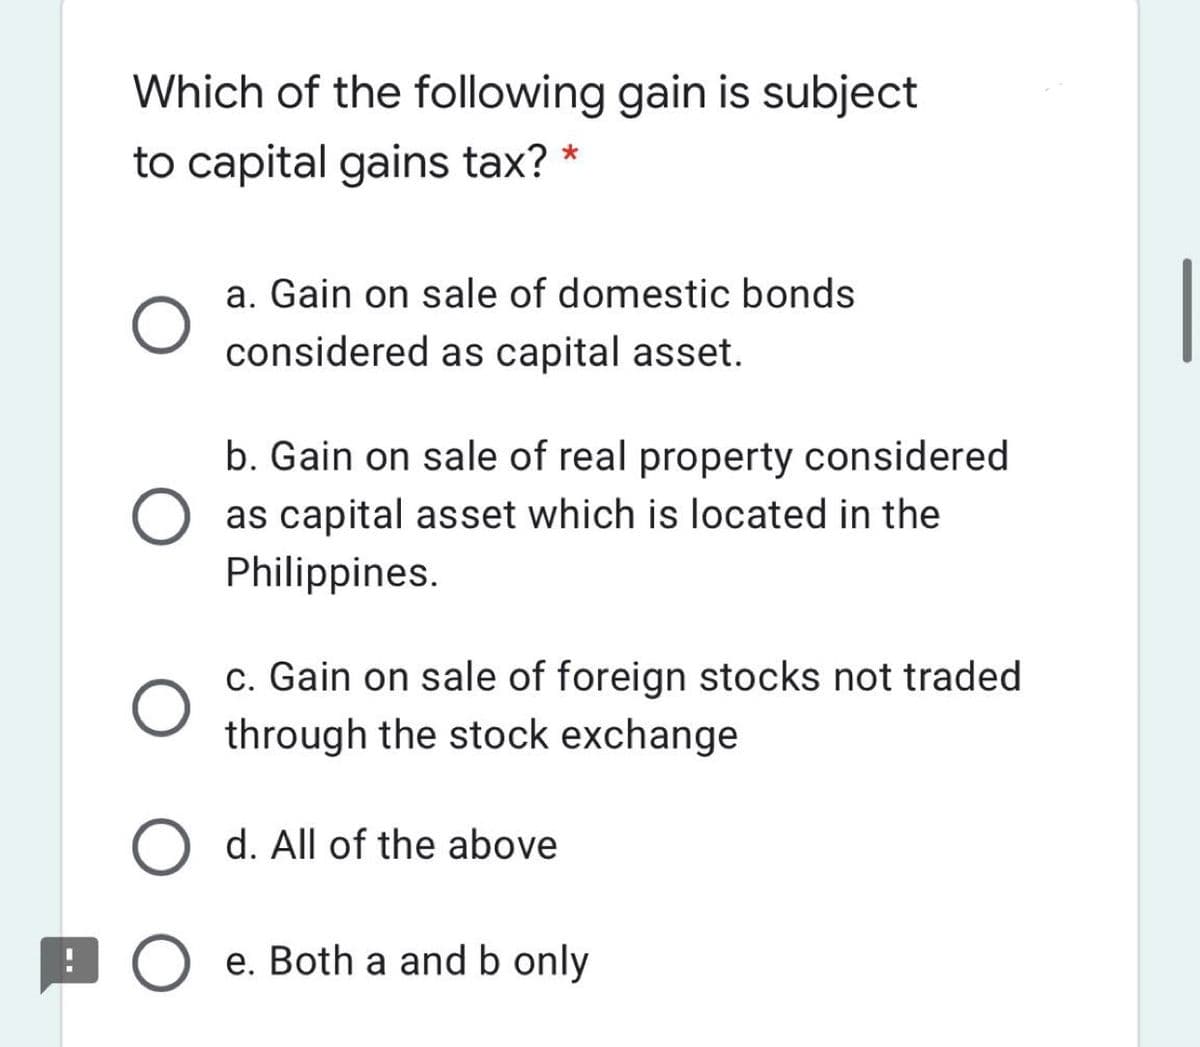 Which of the following gain is subject
to capital gains tax? *
a. Gain on sale of domestic bonds
considered as capital asset.
b. Gain on sale of real property considered
as capital asset which is located in the
Philippines.
c. Gain on sale of foreign stocks not traded
through the stock exchange
O d. All of the above
9 O e. Both a and b only
